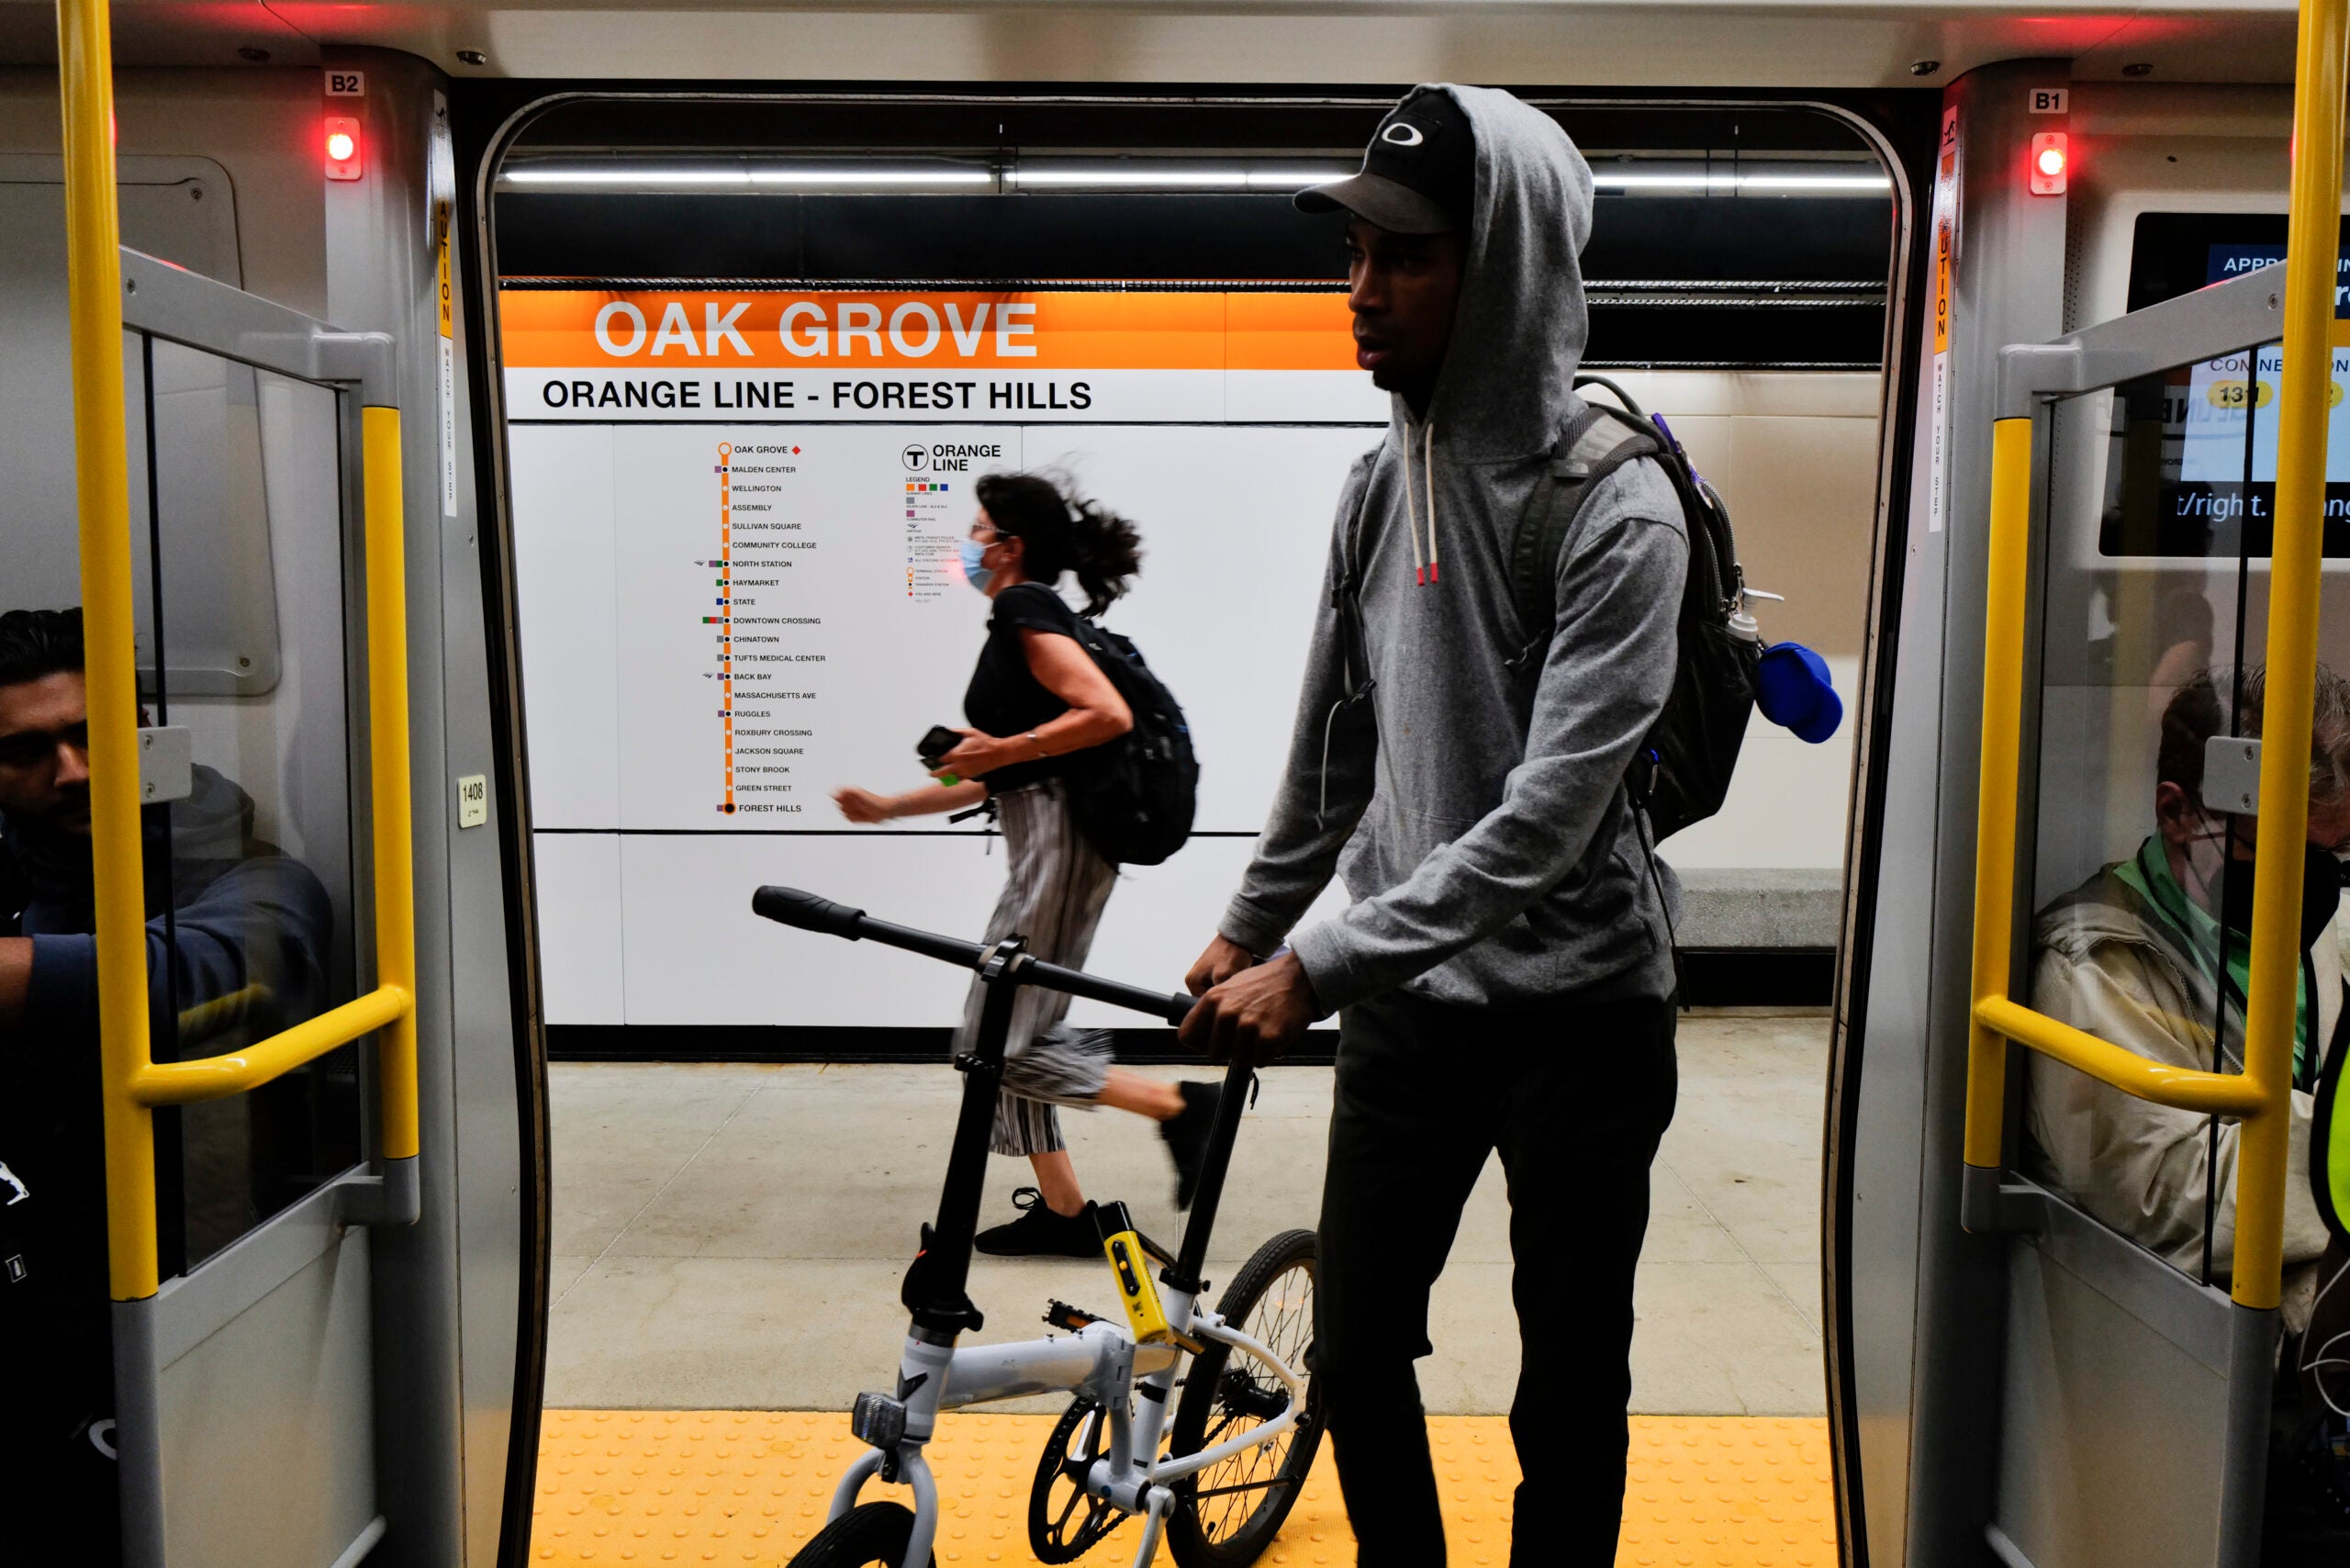 Scenes from the return of the Orange Line